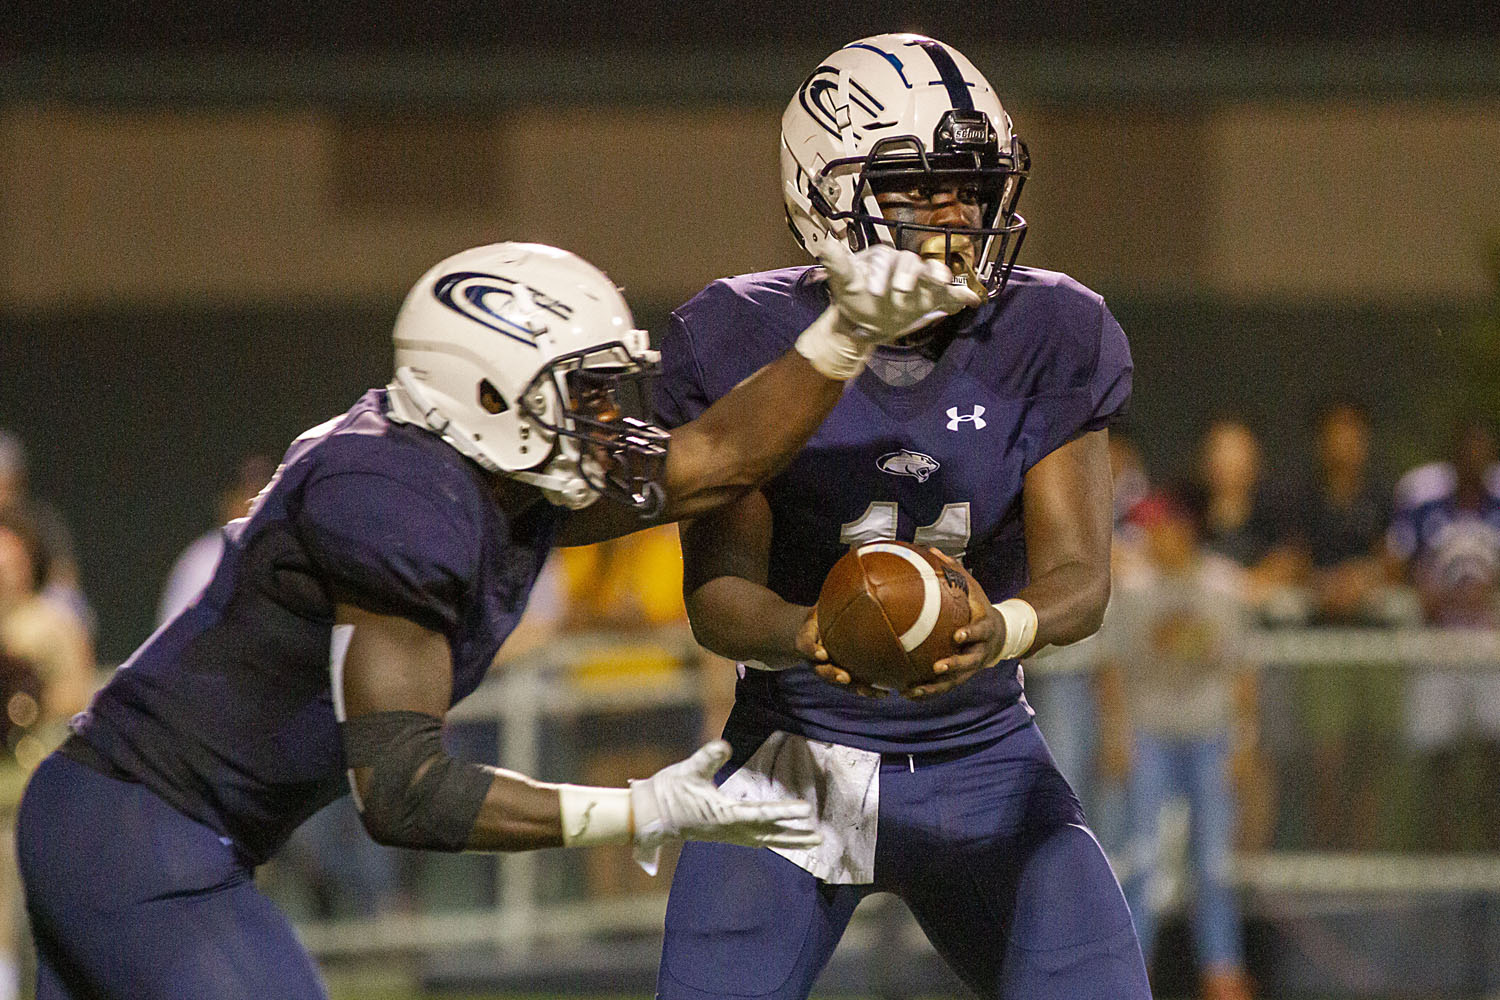 Clay-Chalkville drops second straight in Class 6A Region 6 thriller